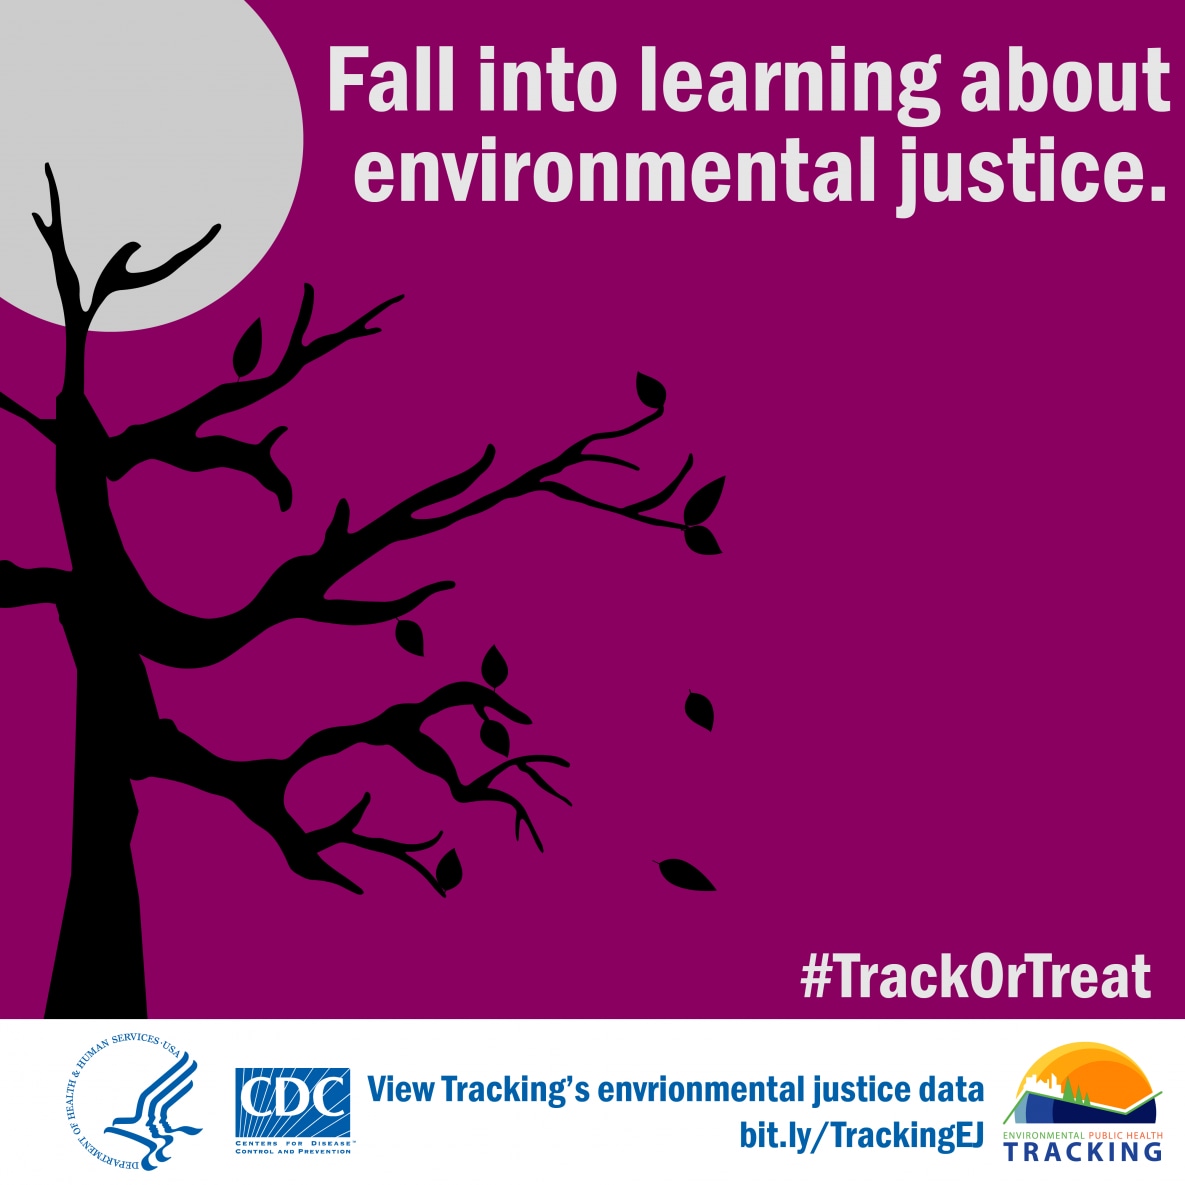 Barren tree graphic with leaves falling and text: "Fall into learning about environmental justice."